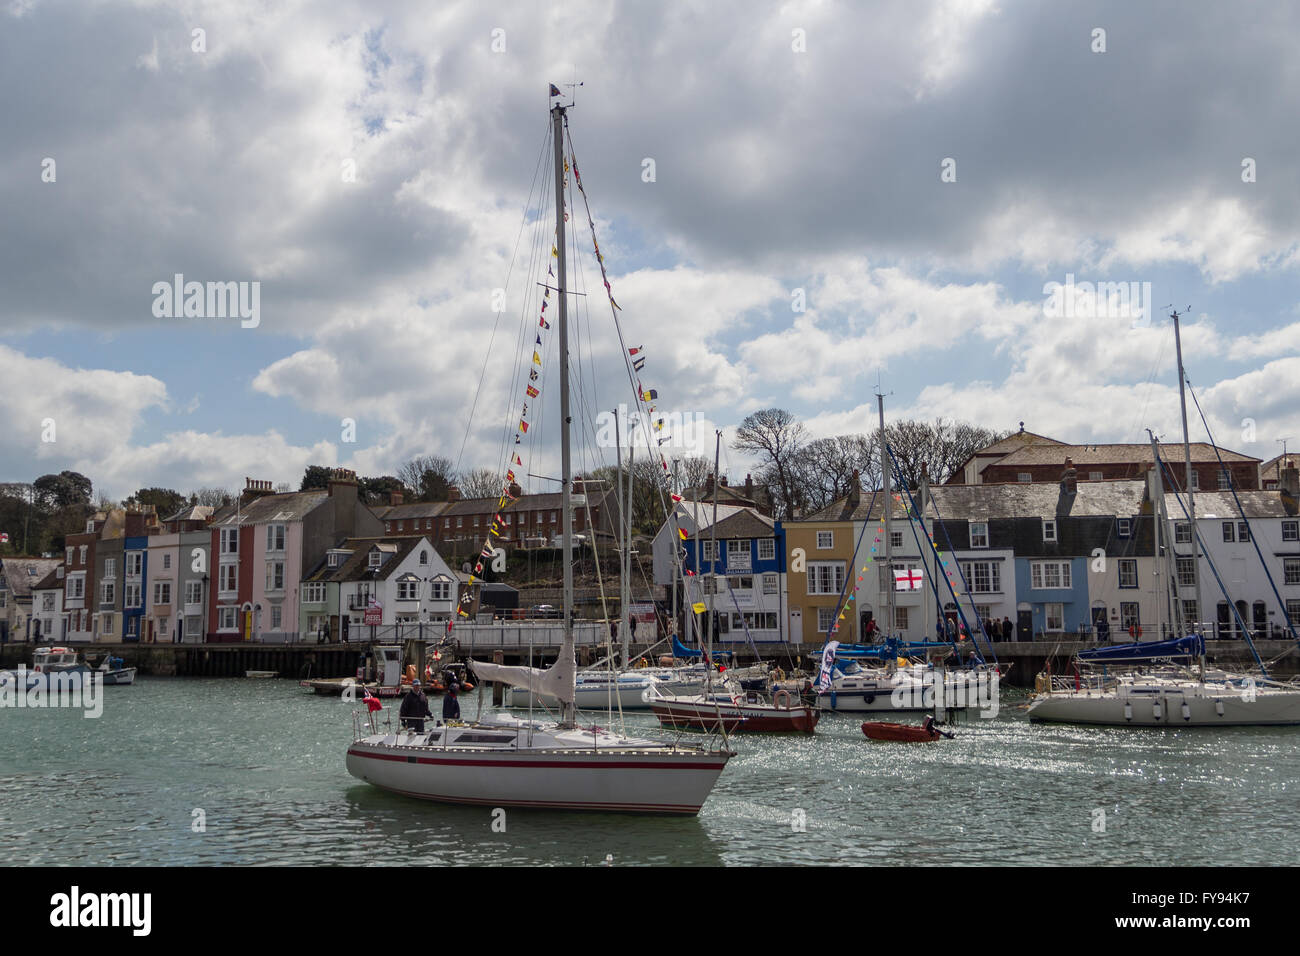 Weymouth, England. 23 April 2016. Queen's 90th Birthday Floating Tribute. Sailing boat entering harbour. Credit:  Frances Underwood/Alamy Live News Stock Photo